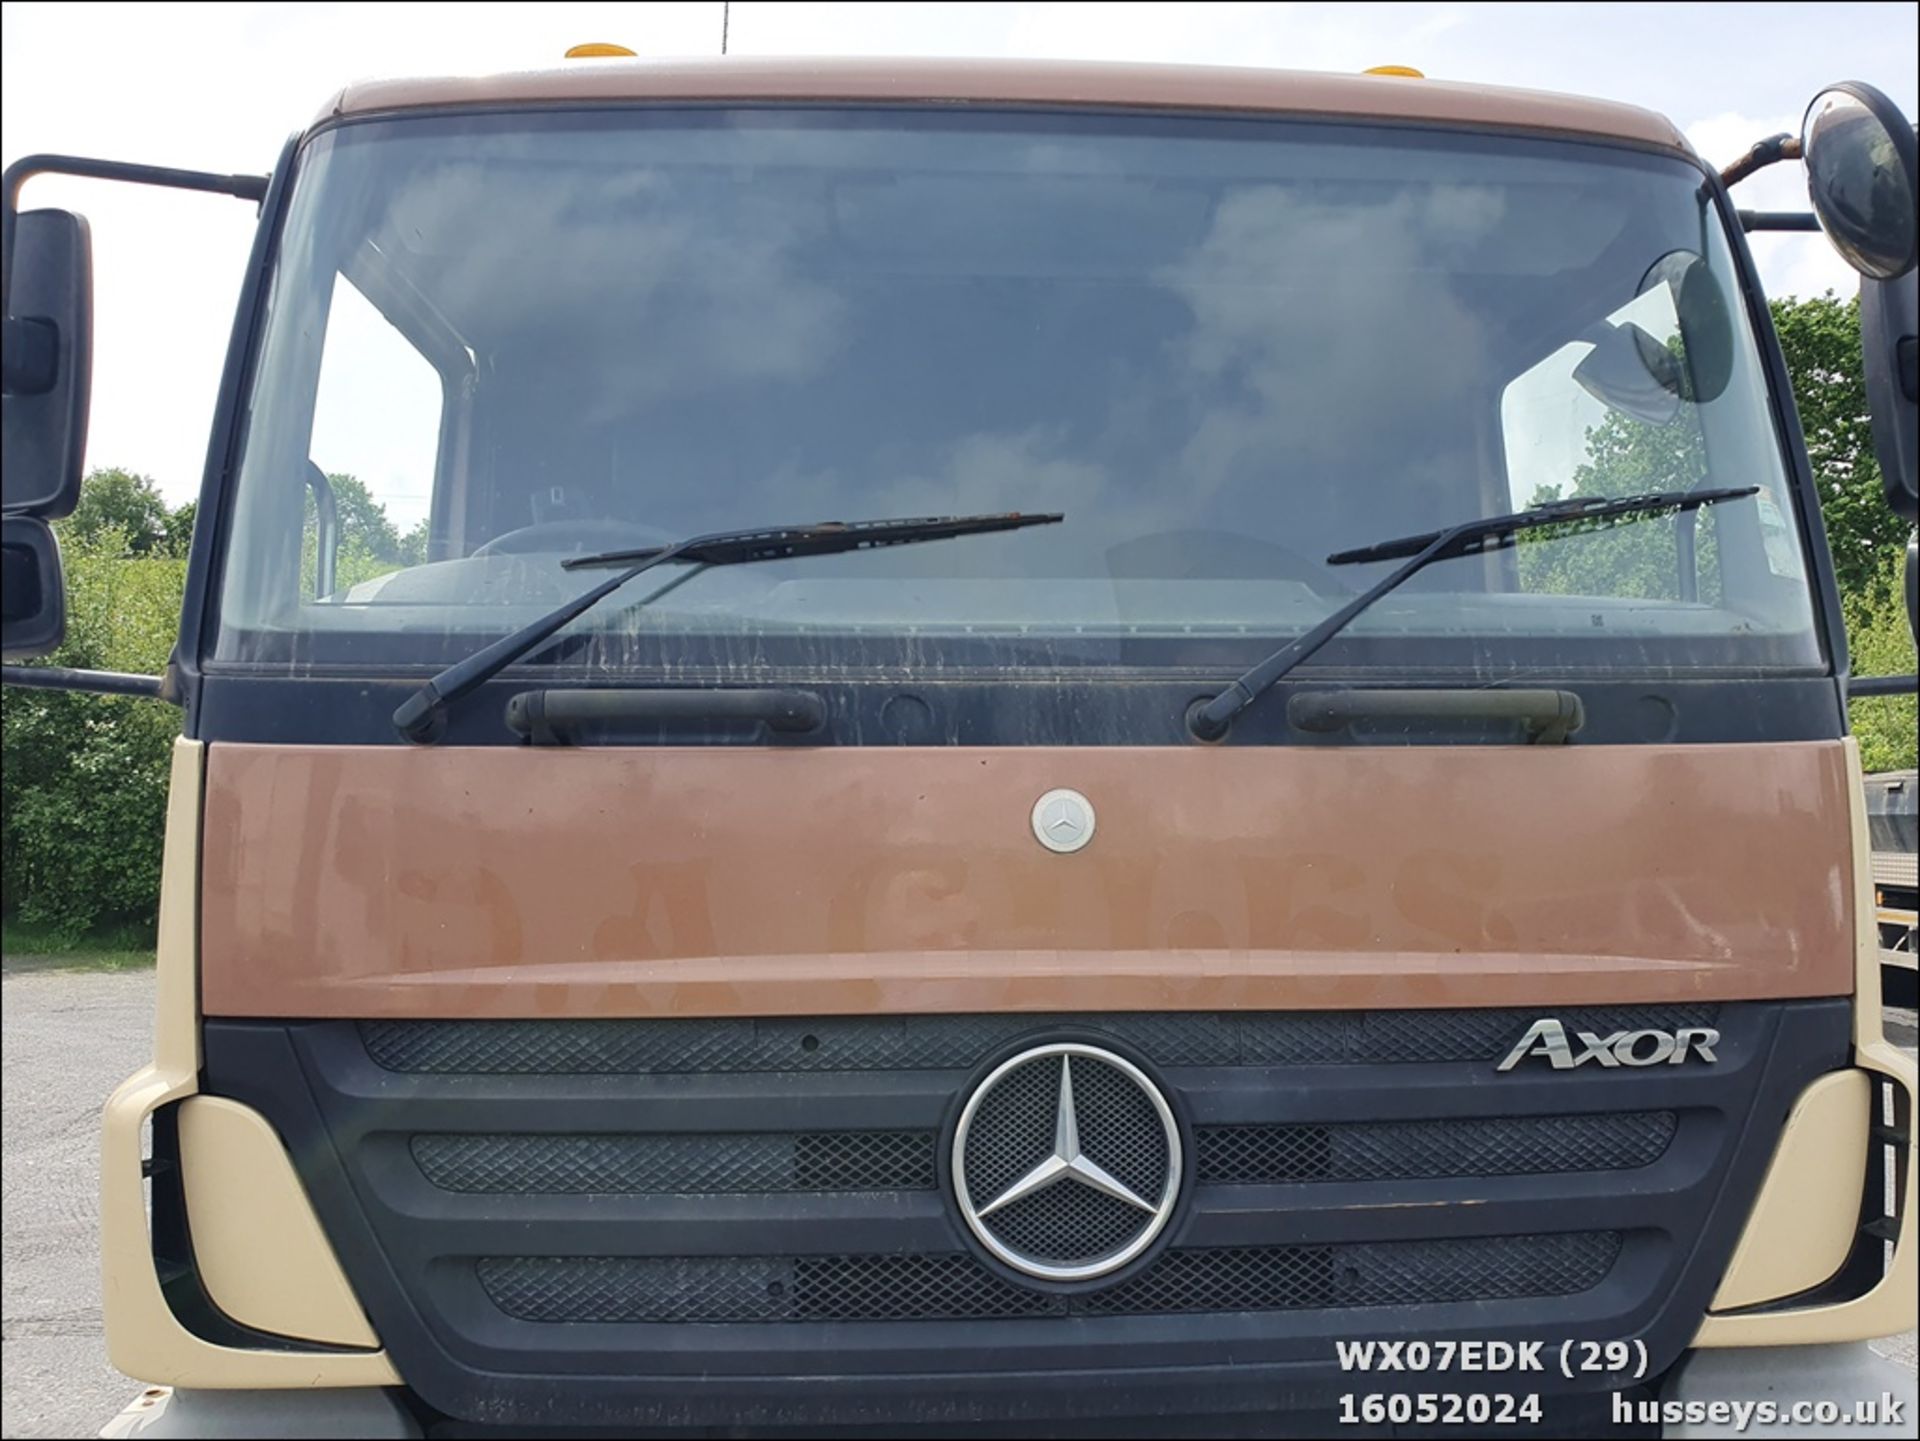 07/07 MERCEDES ATEGO - 6370cc 2dr (Brown/cream) - Image 30 of 54